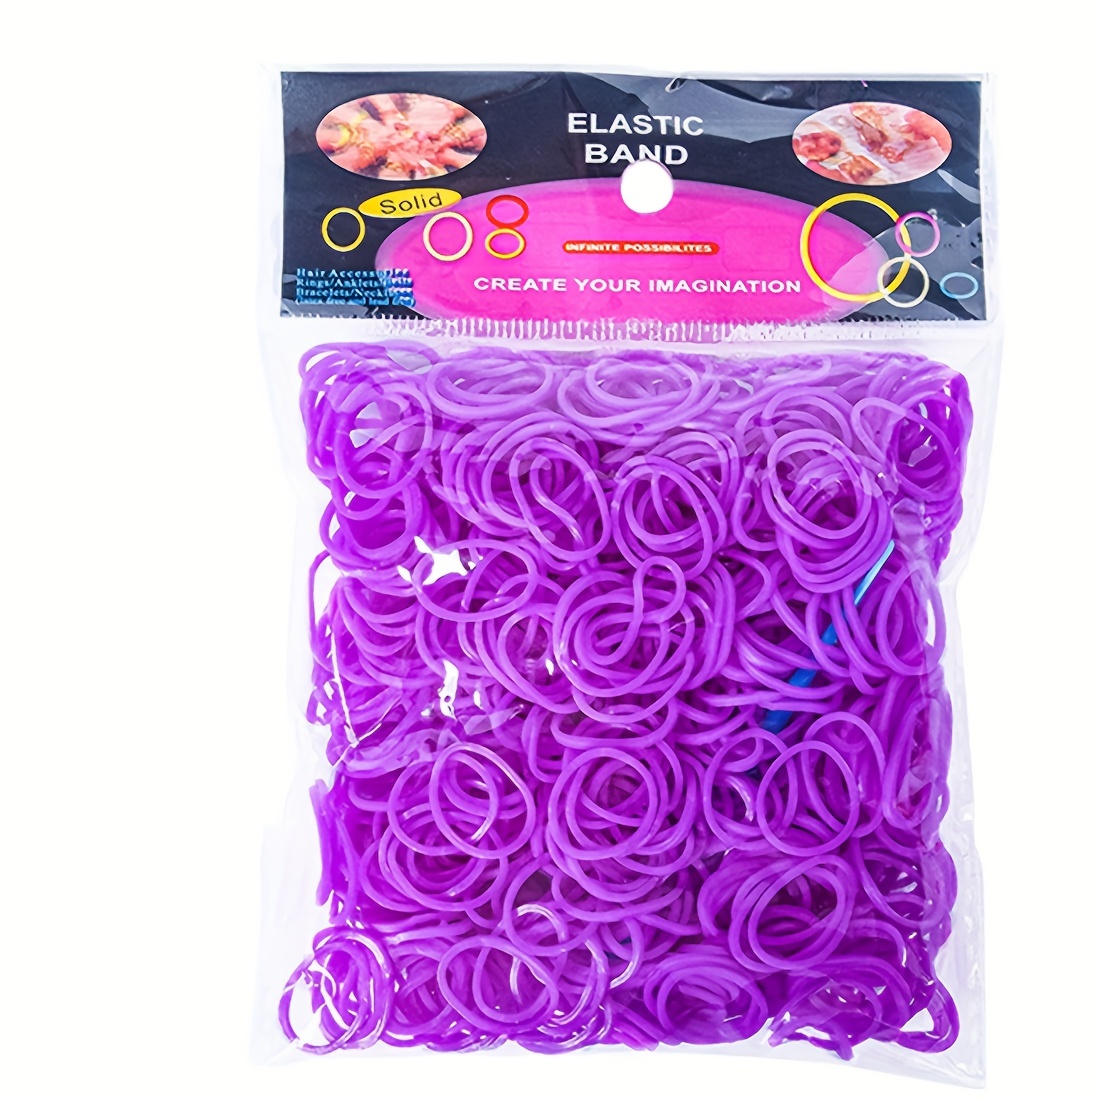 Loom Rubber Band Refill Kit In 31 Colors,Weaving Bracelet Making Kit for  Kids Weaving DIY Crafting Gift Loom Bands Craft - AliExpress